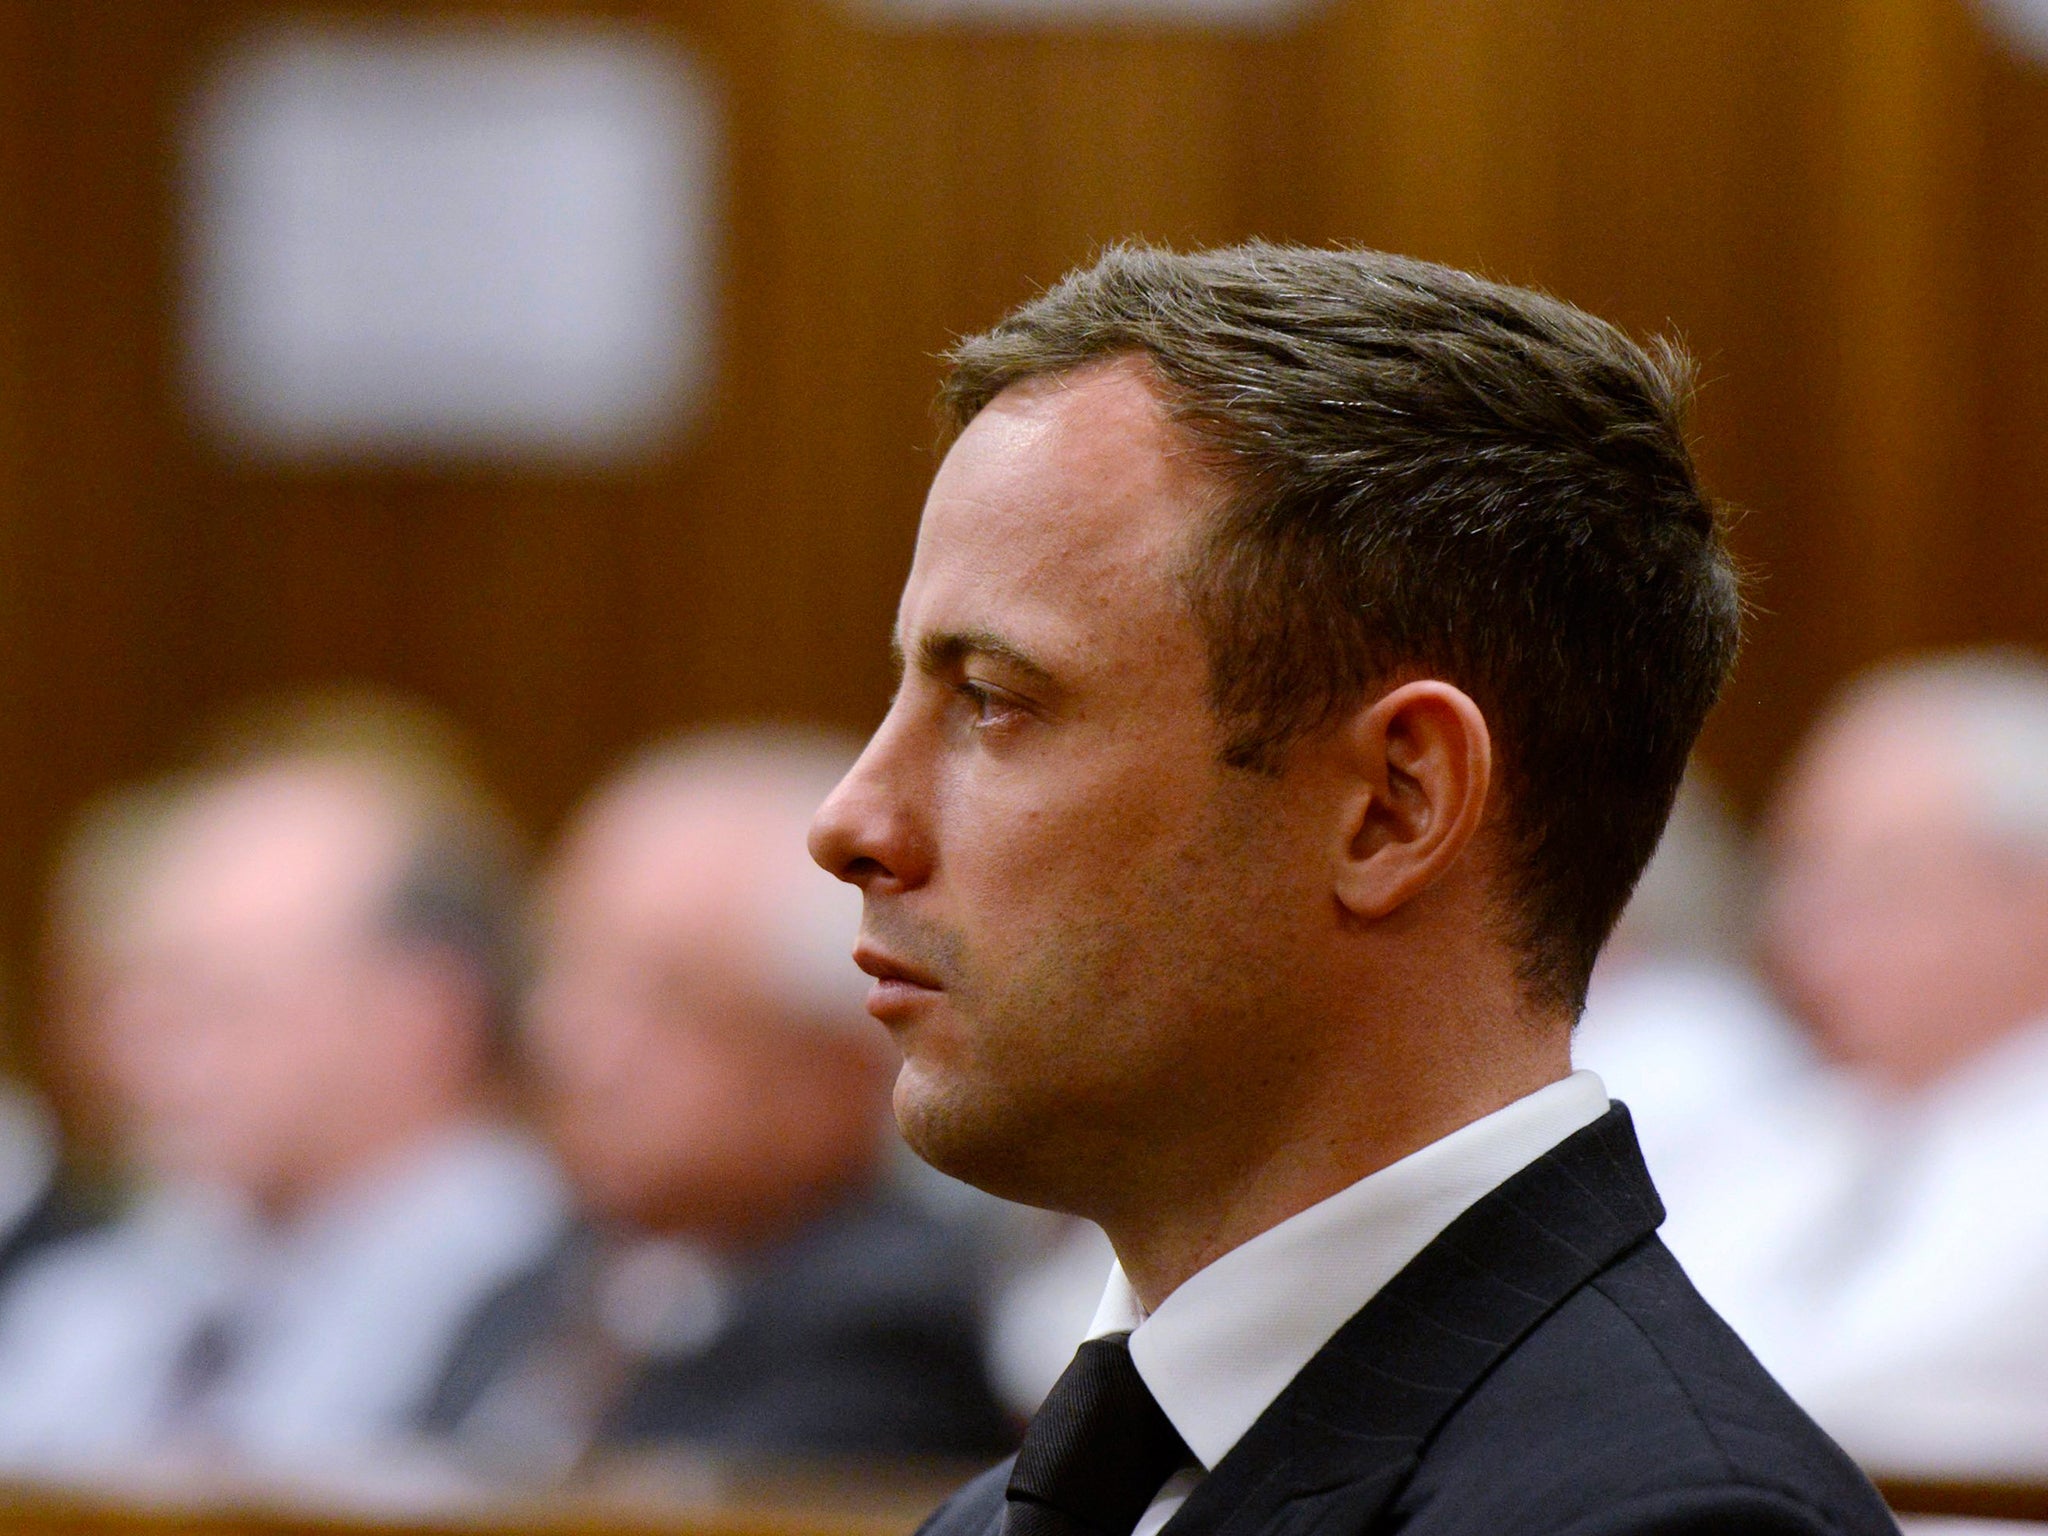 Oscar Pistorius attends his last day of sentencing at the North Gauteng High Court in Pretoria